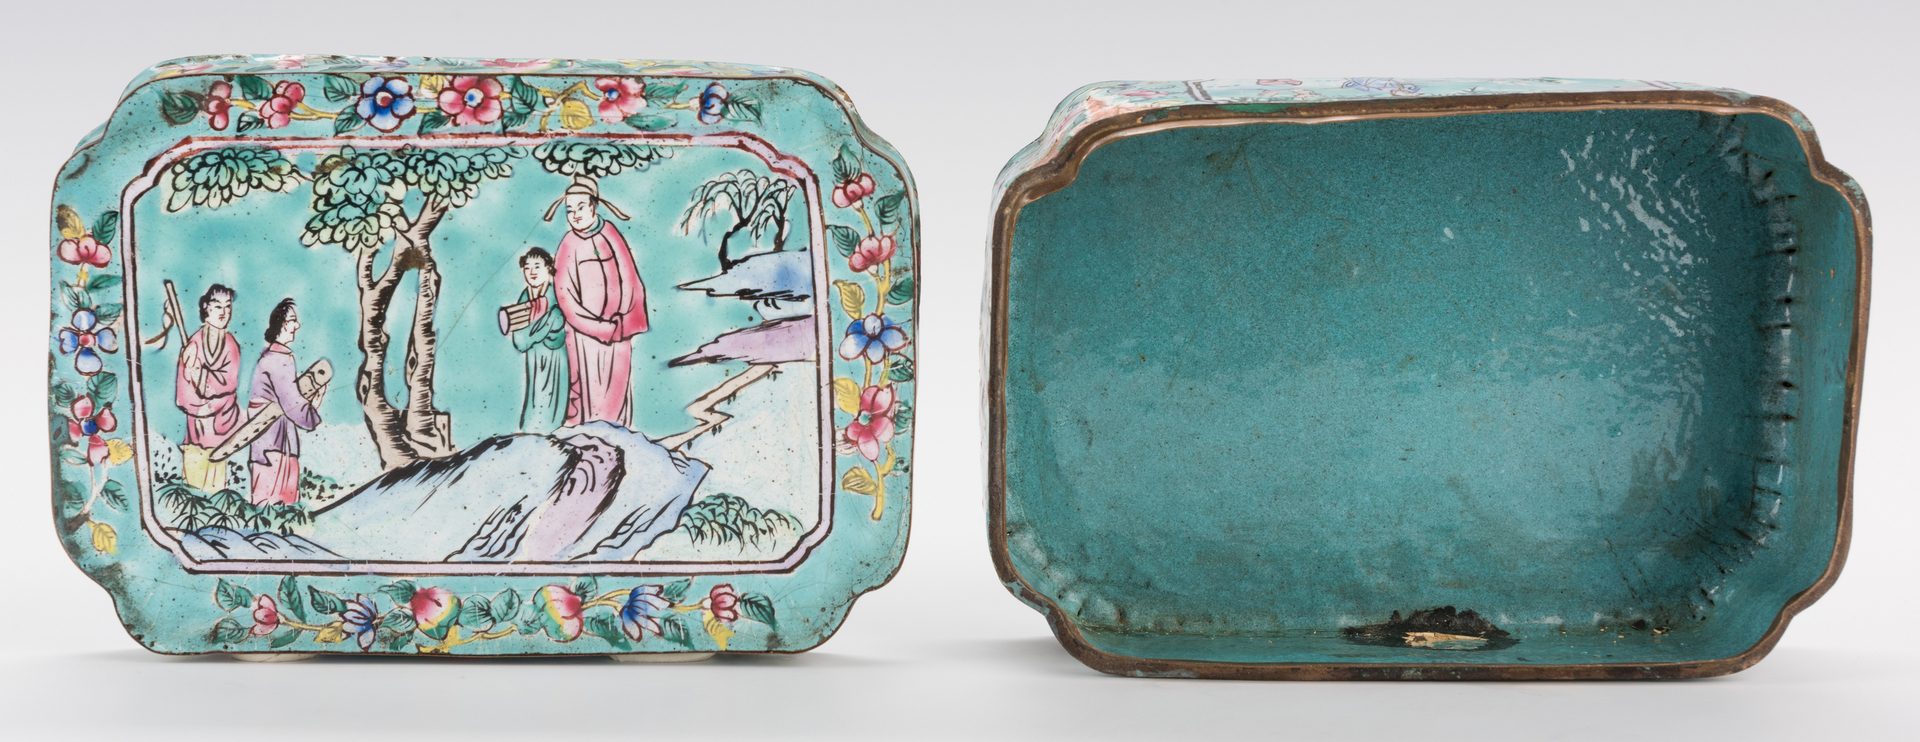 Lot 207: 5 Pcs. Chinese Cloisonne & Enameled Table Items